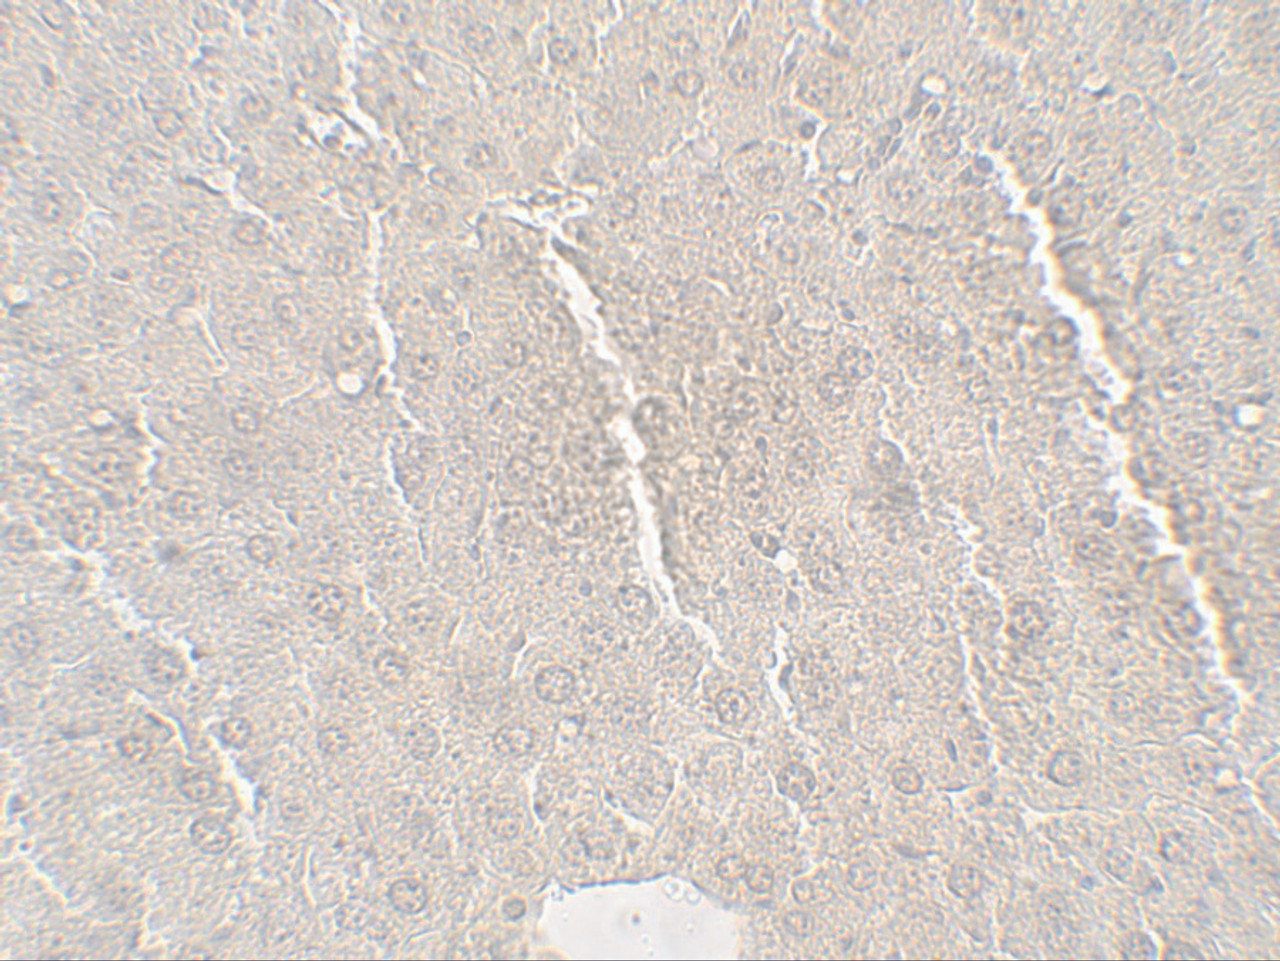 Immunohistochemistry of Betatrophin in mouse liver tissue with Betatrophin antibody at 5 ug/mL.